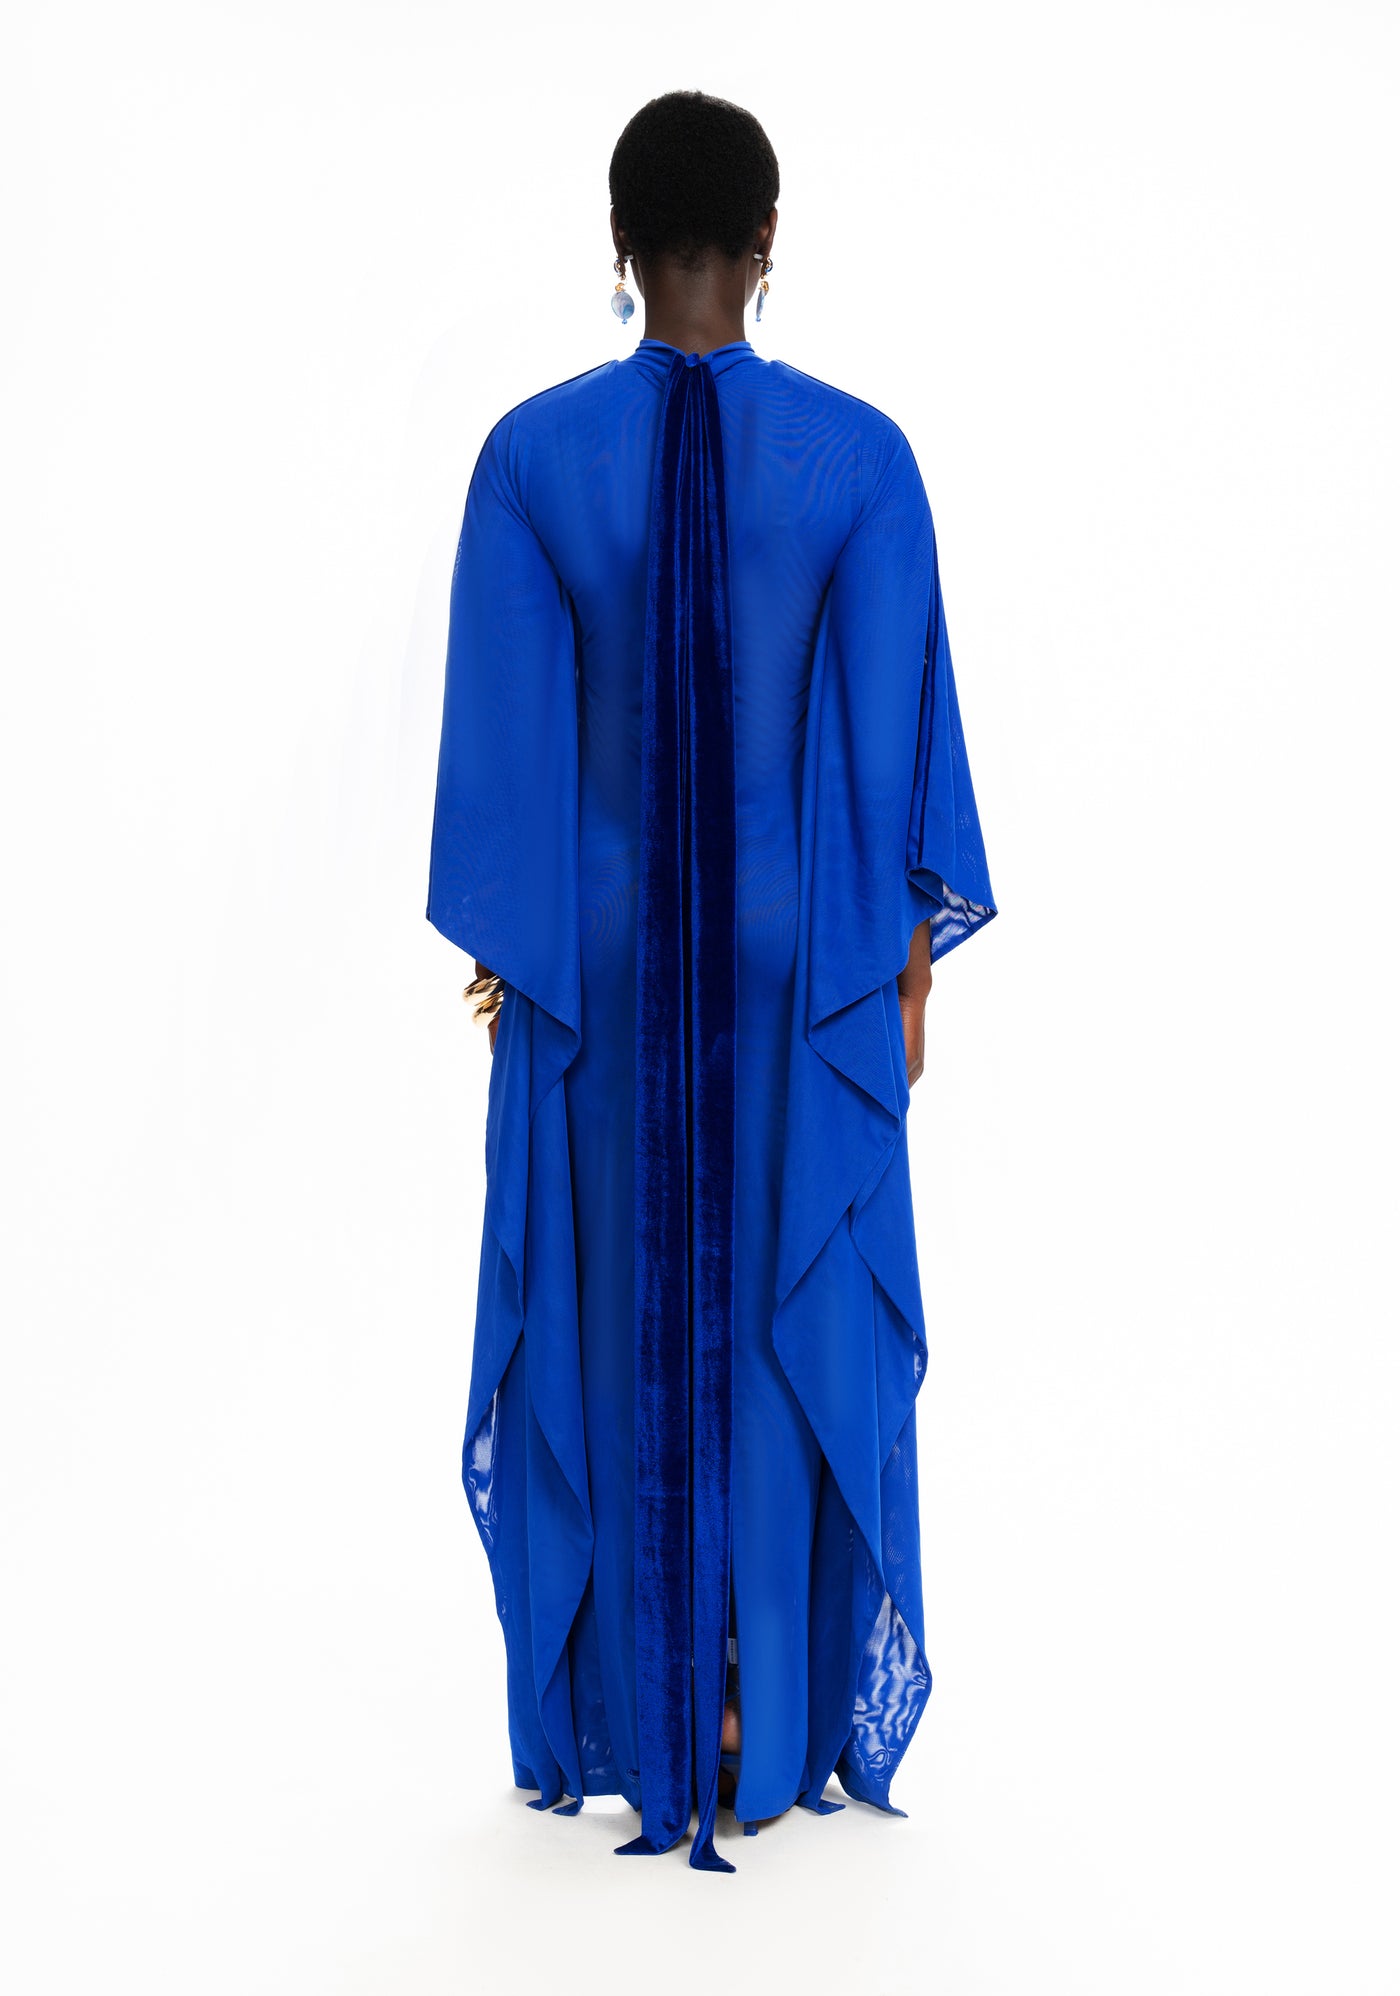 Mesh Batwing Gown - Sapphire